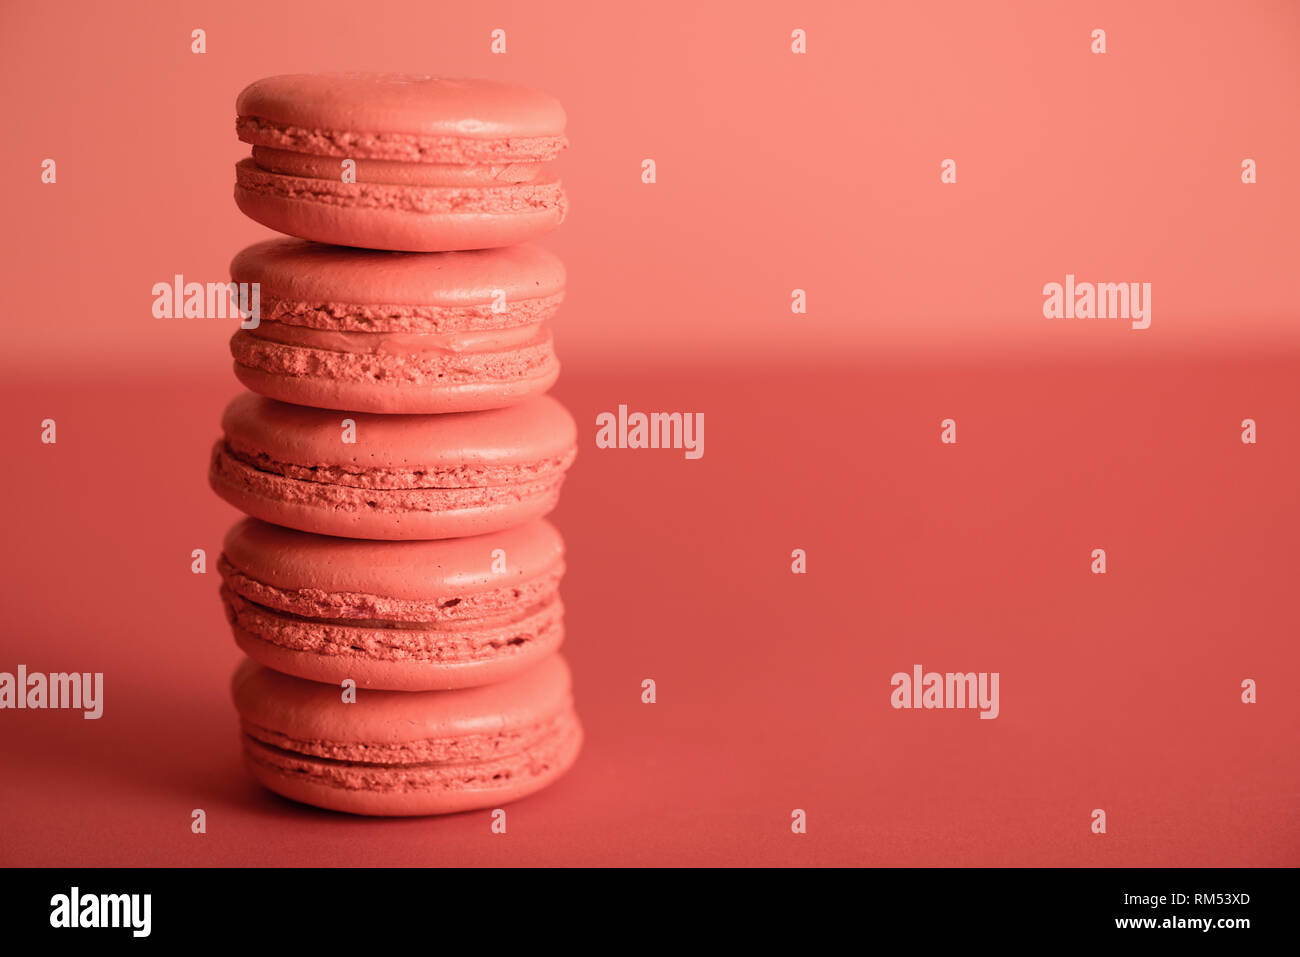 sweet macaroons in Living coral color with copy space. Pantone color of the year 2019 concept Stock Photo